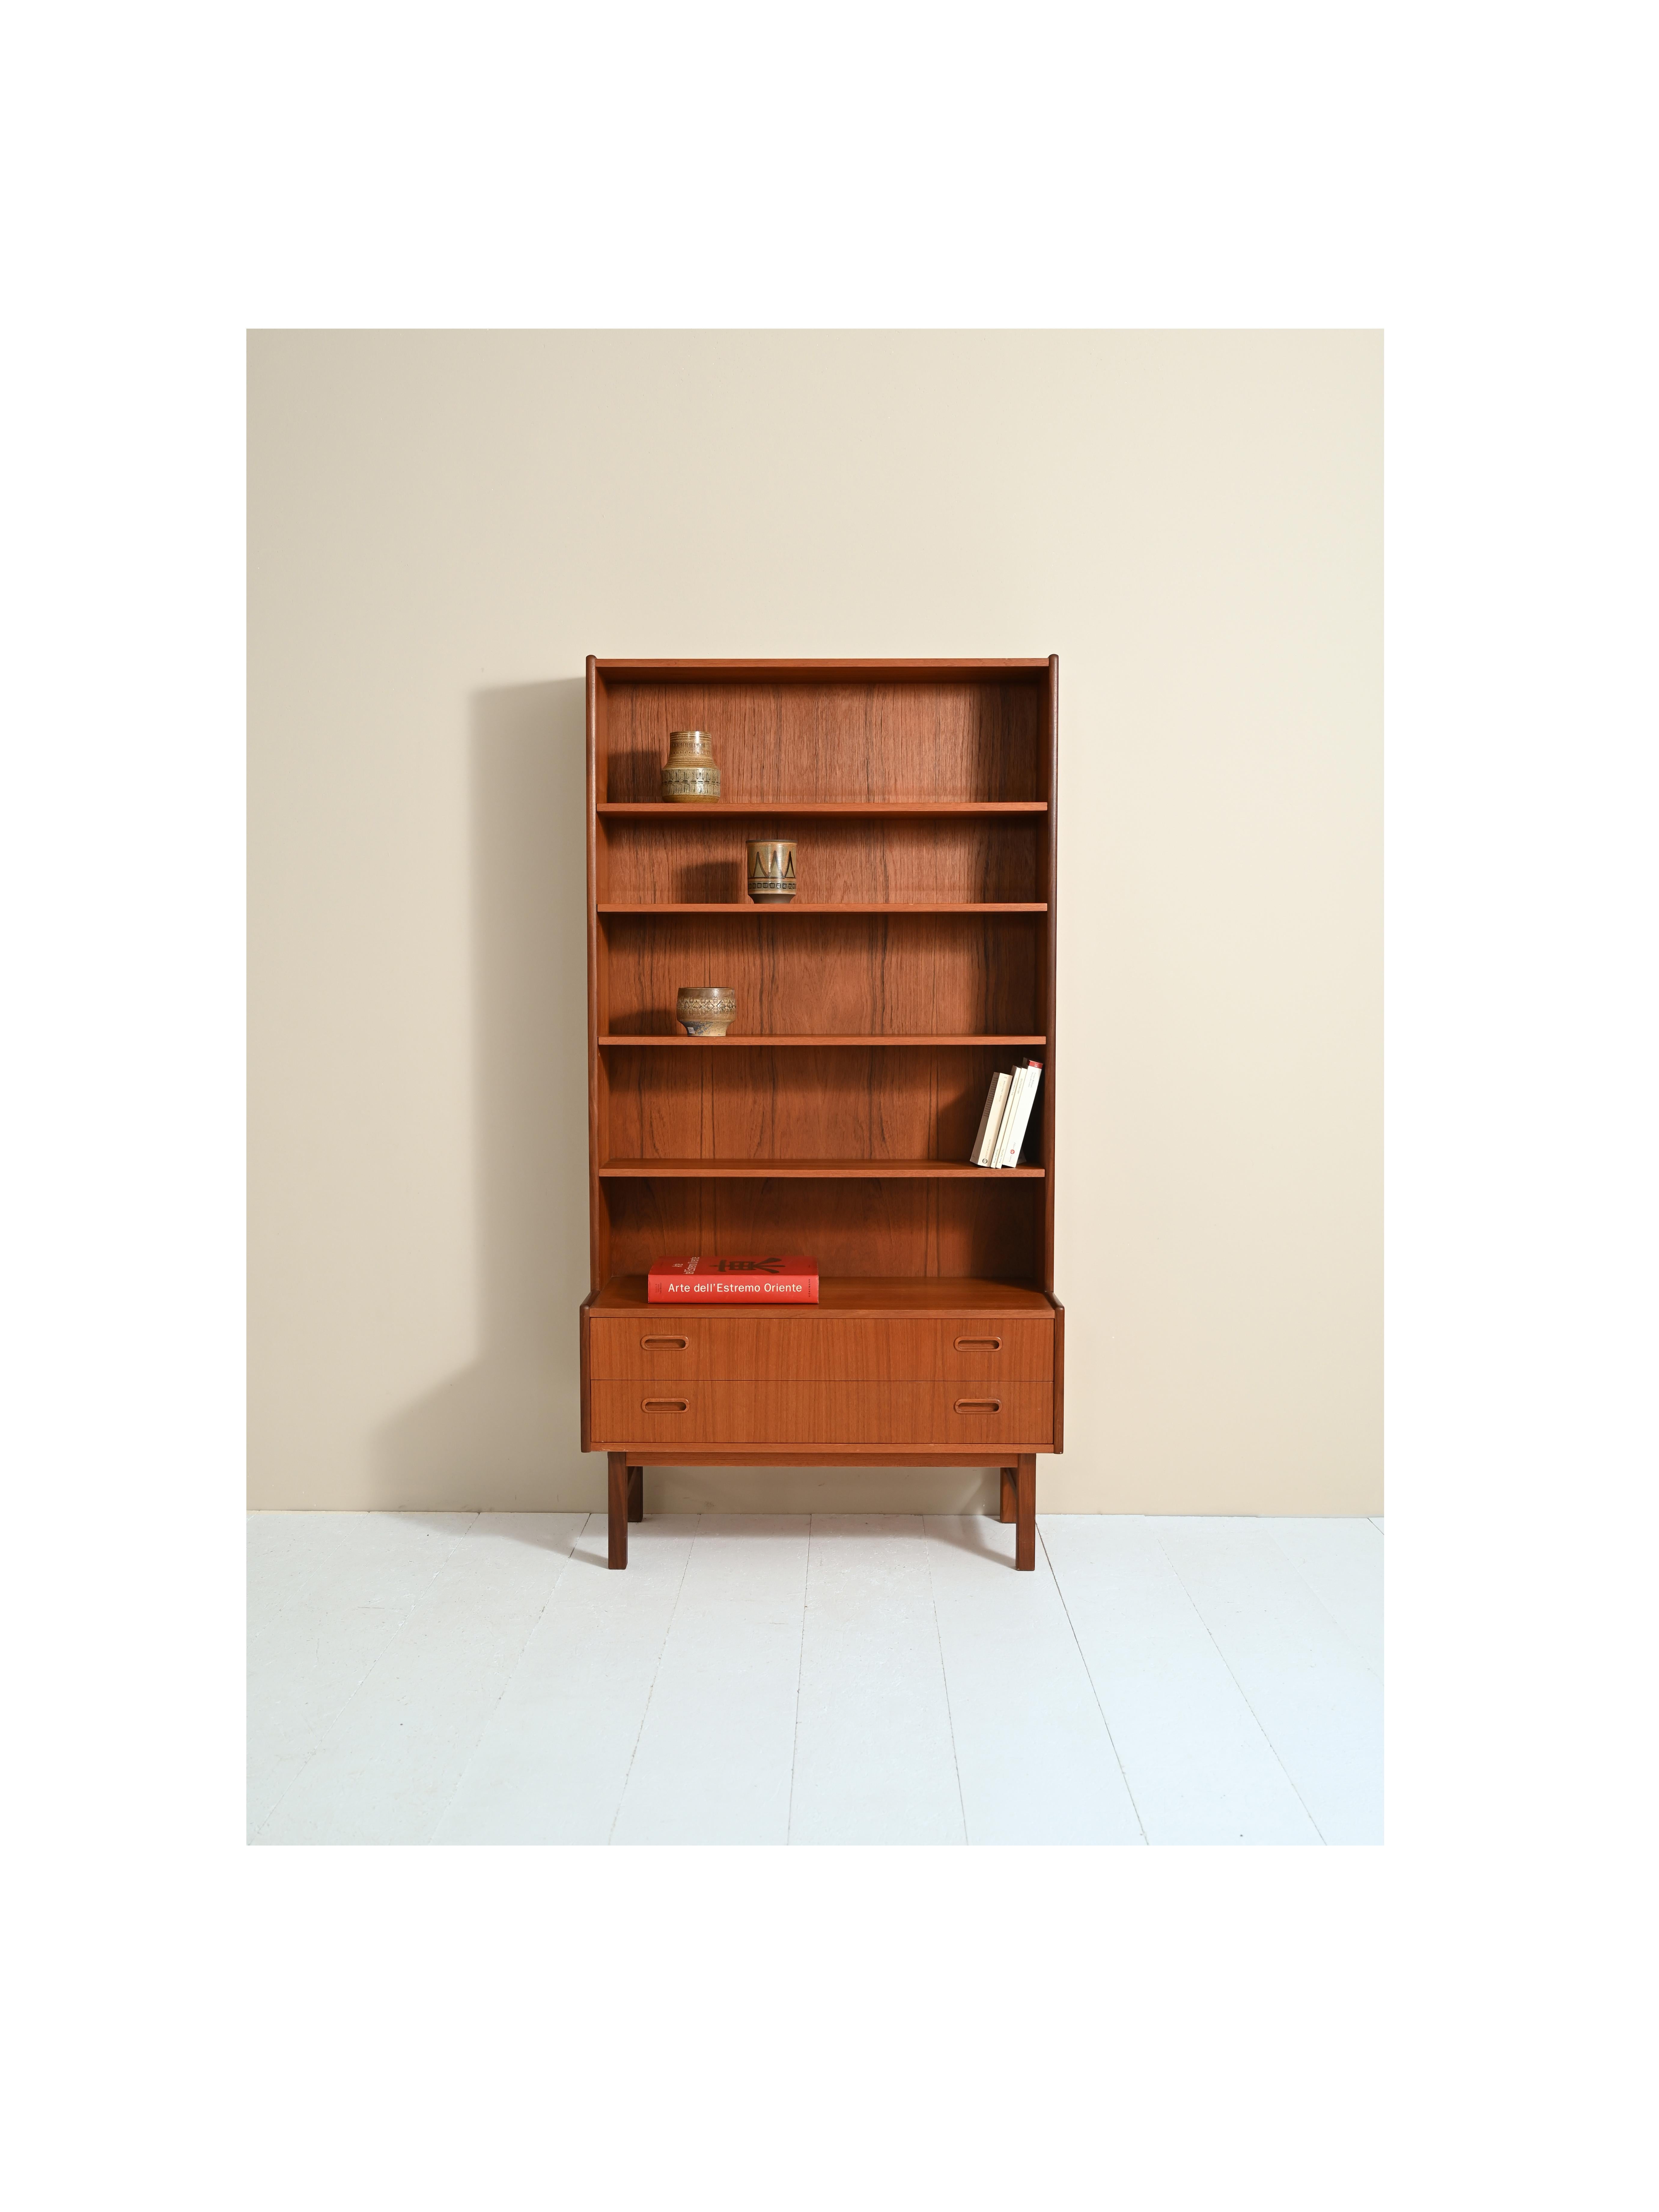 Original vintage teak cabinet of Scandinavian origin, consisting of two parts.
The upper part is a bookcase equipped with adjustable height shelves, the lower part is a cabinet equipped with two drawers and a compartment with a sliding door.
Ideal